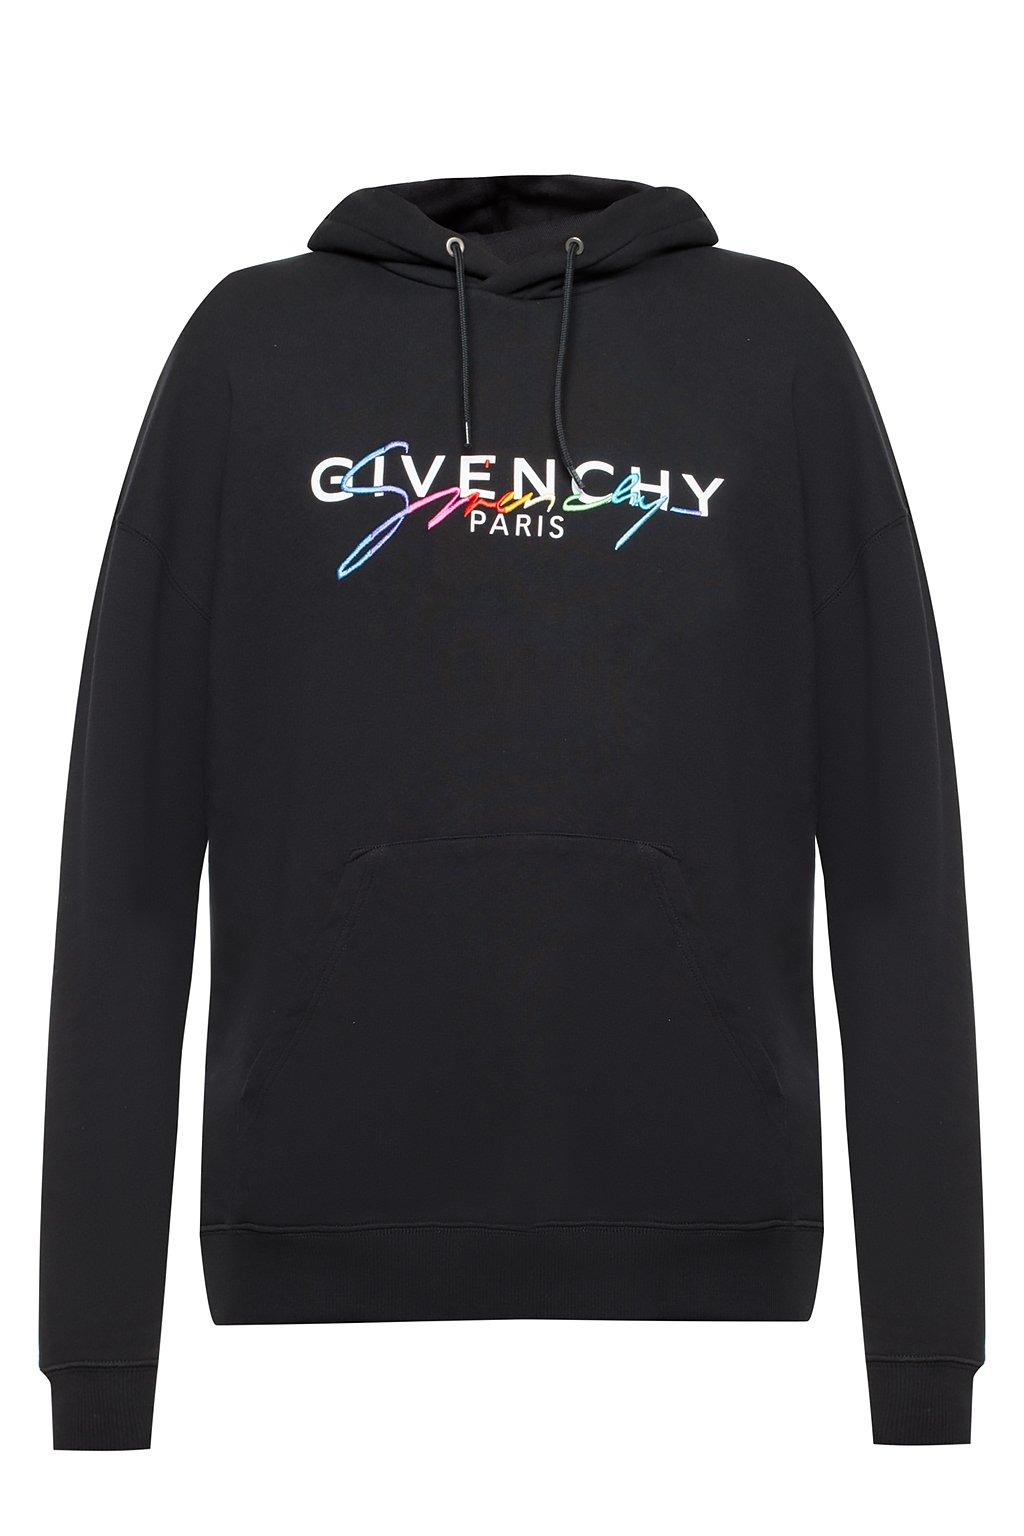 Givenchy Cotton Signature Hoodie in Black for Men - Lyst